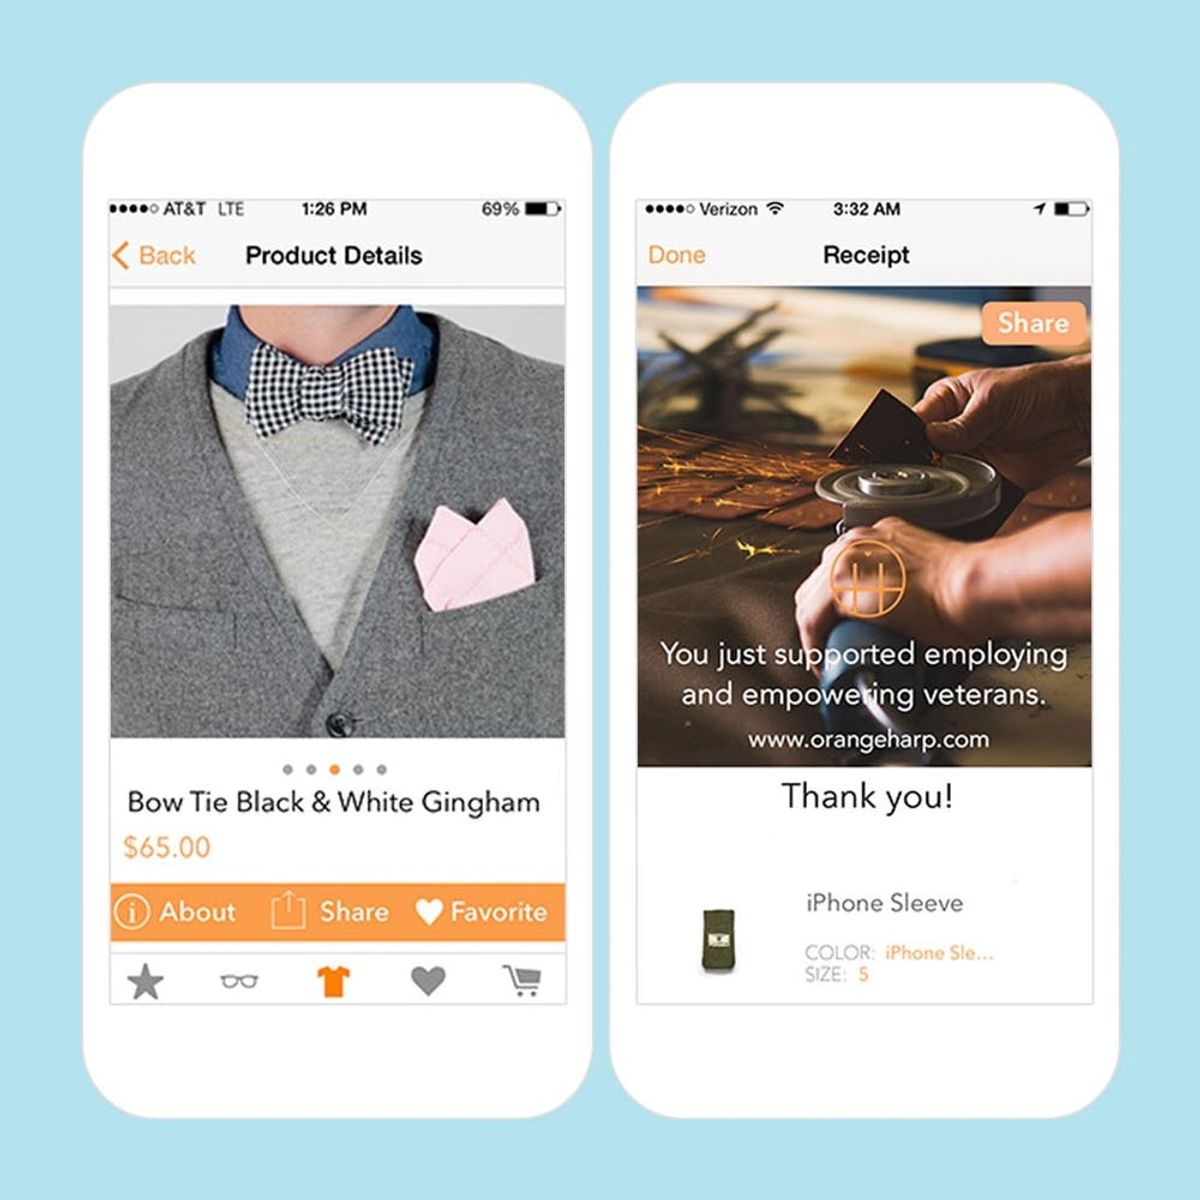 This App Makes It Easy to Find Ethically Sourced Fashion